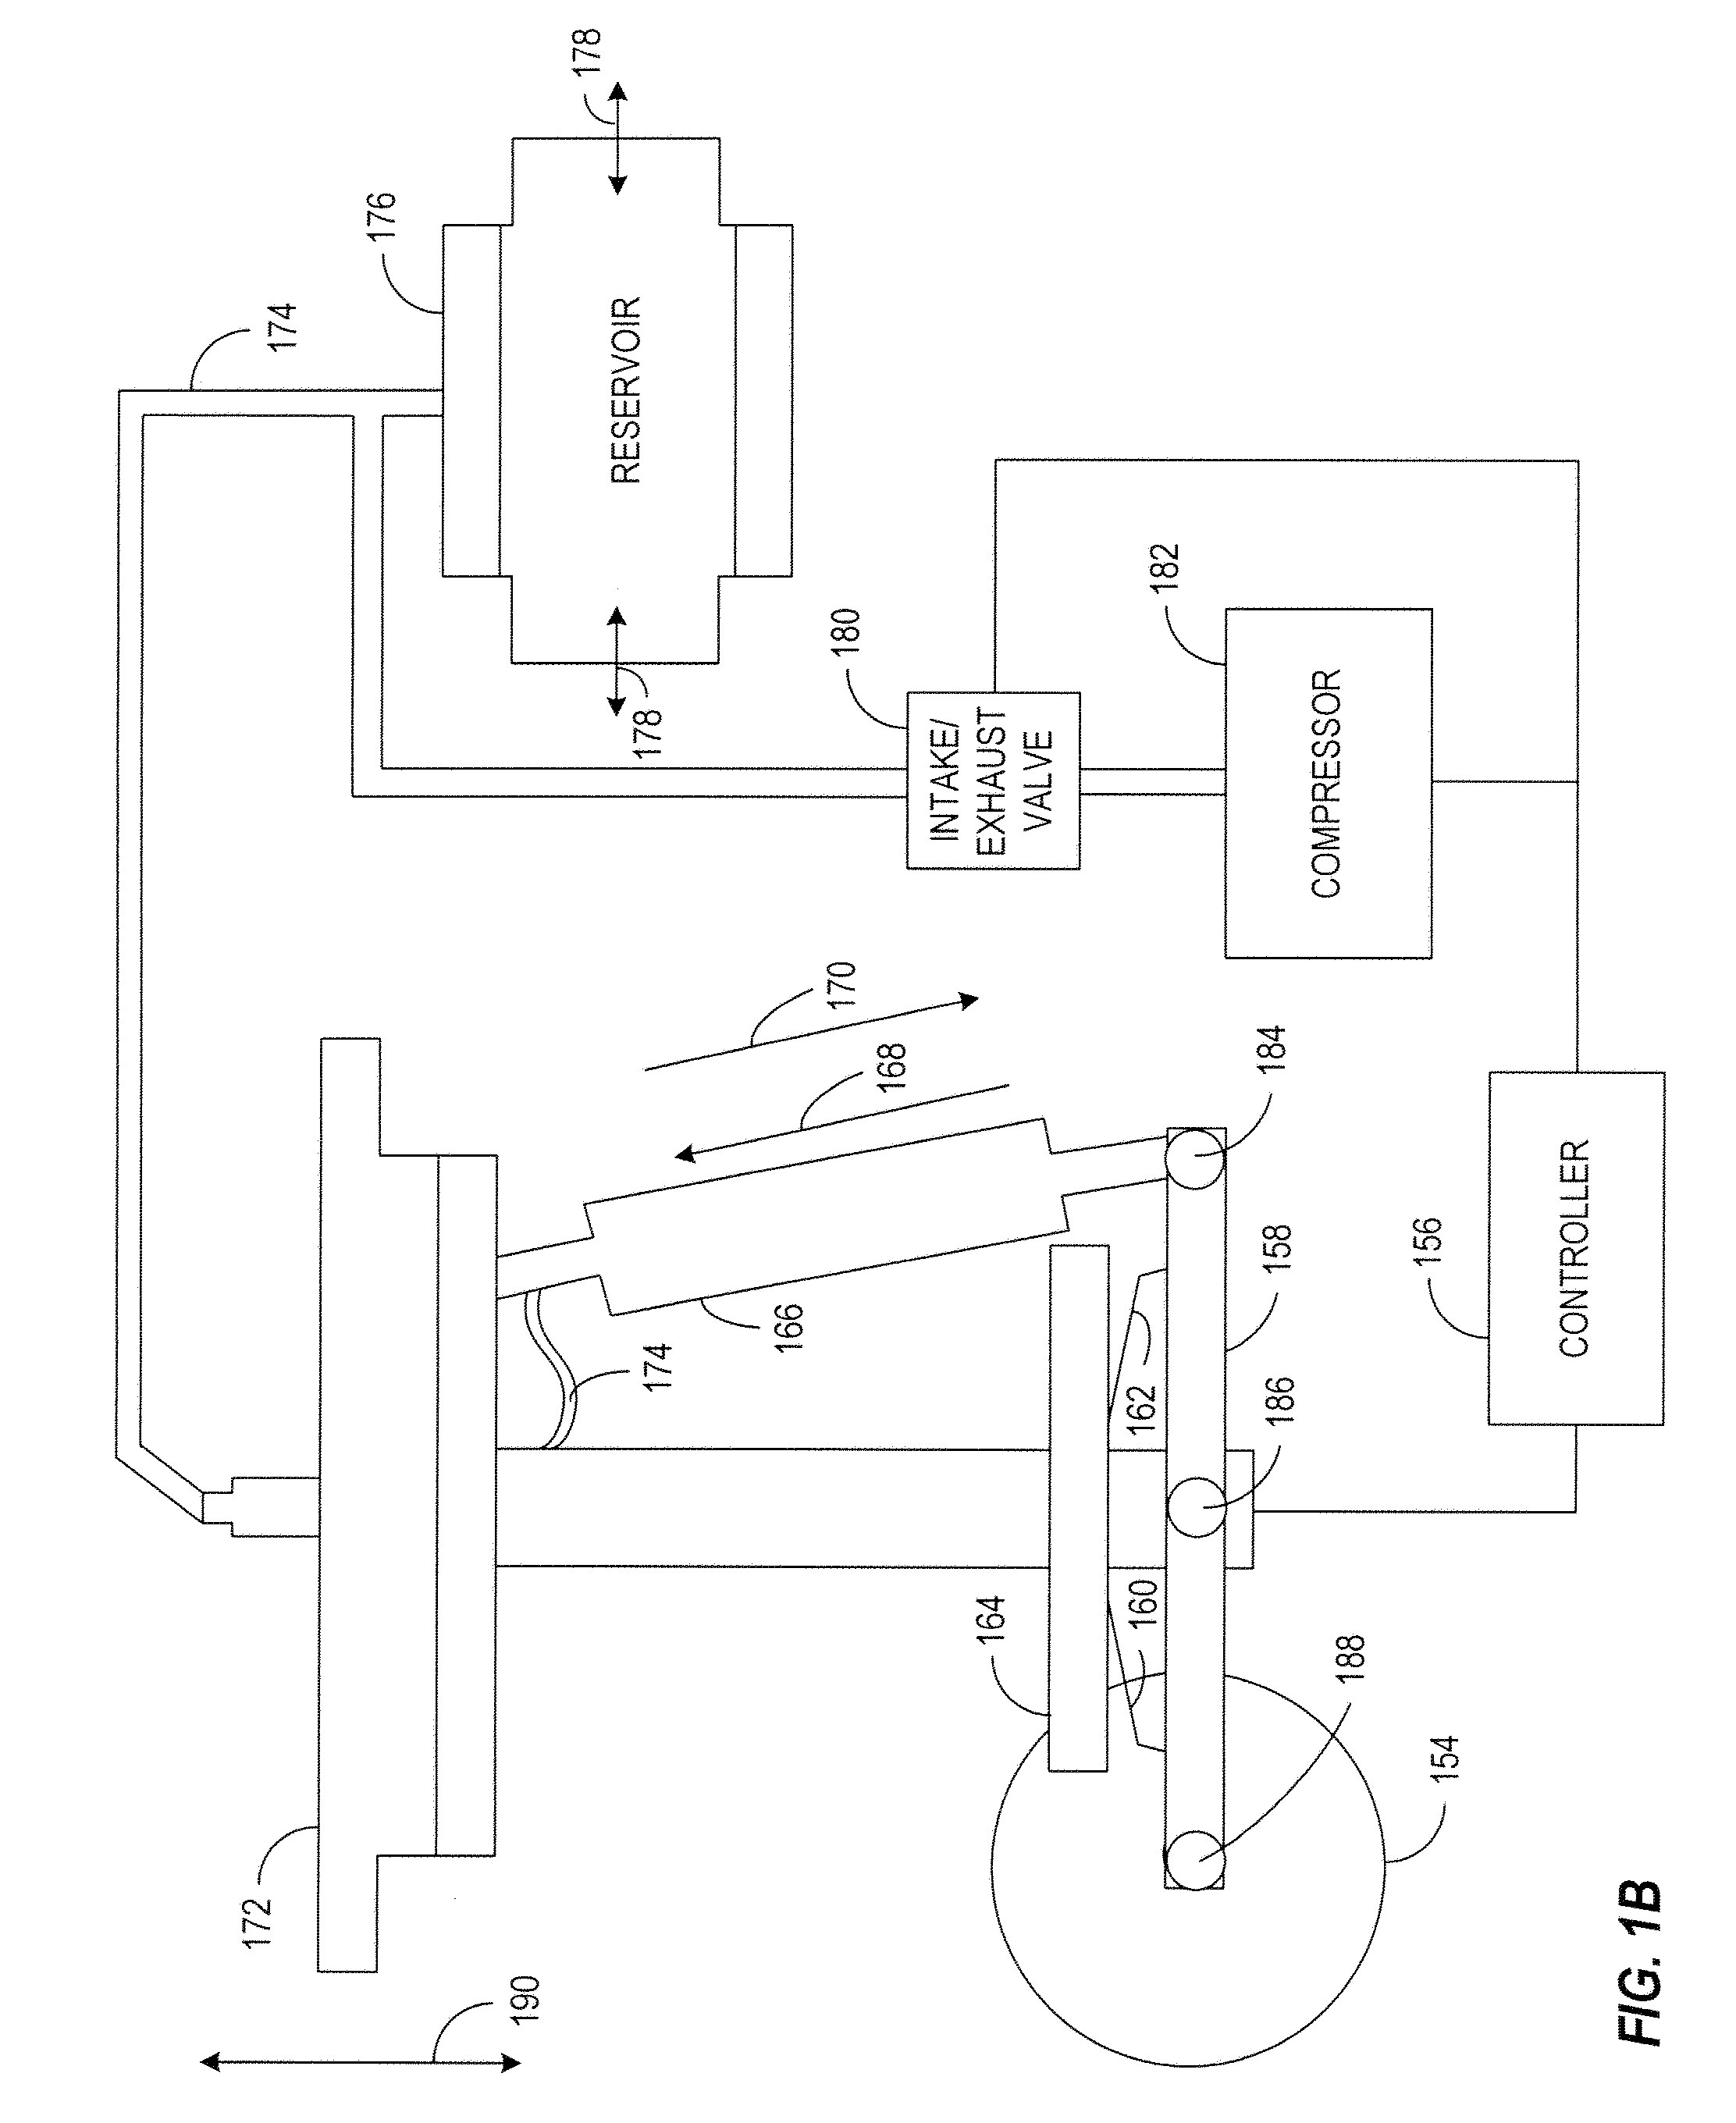 Method and apparatus for an electronic equipment rack